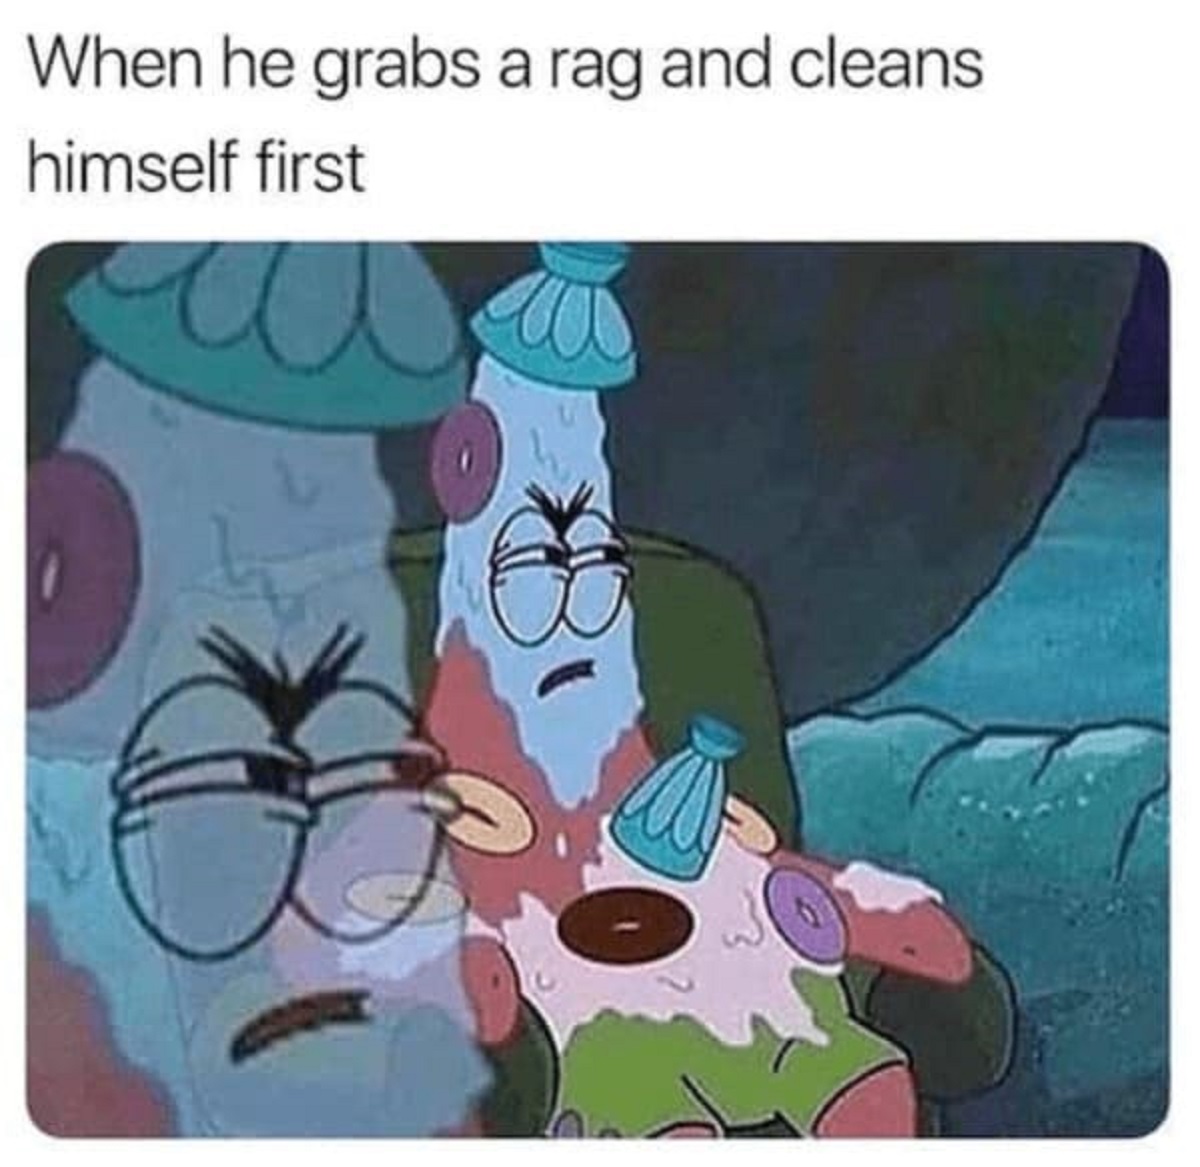 spicy memes -  When he grabs a rag and cleans himself first